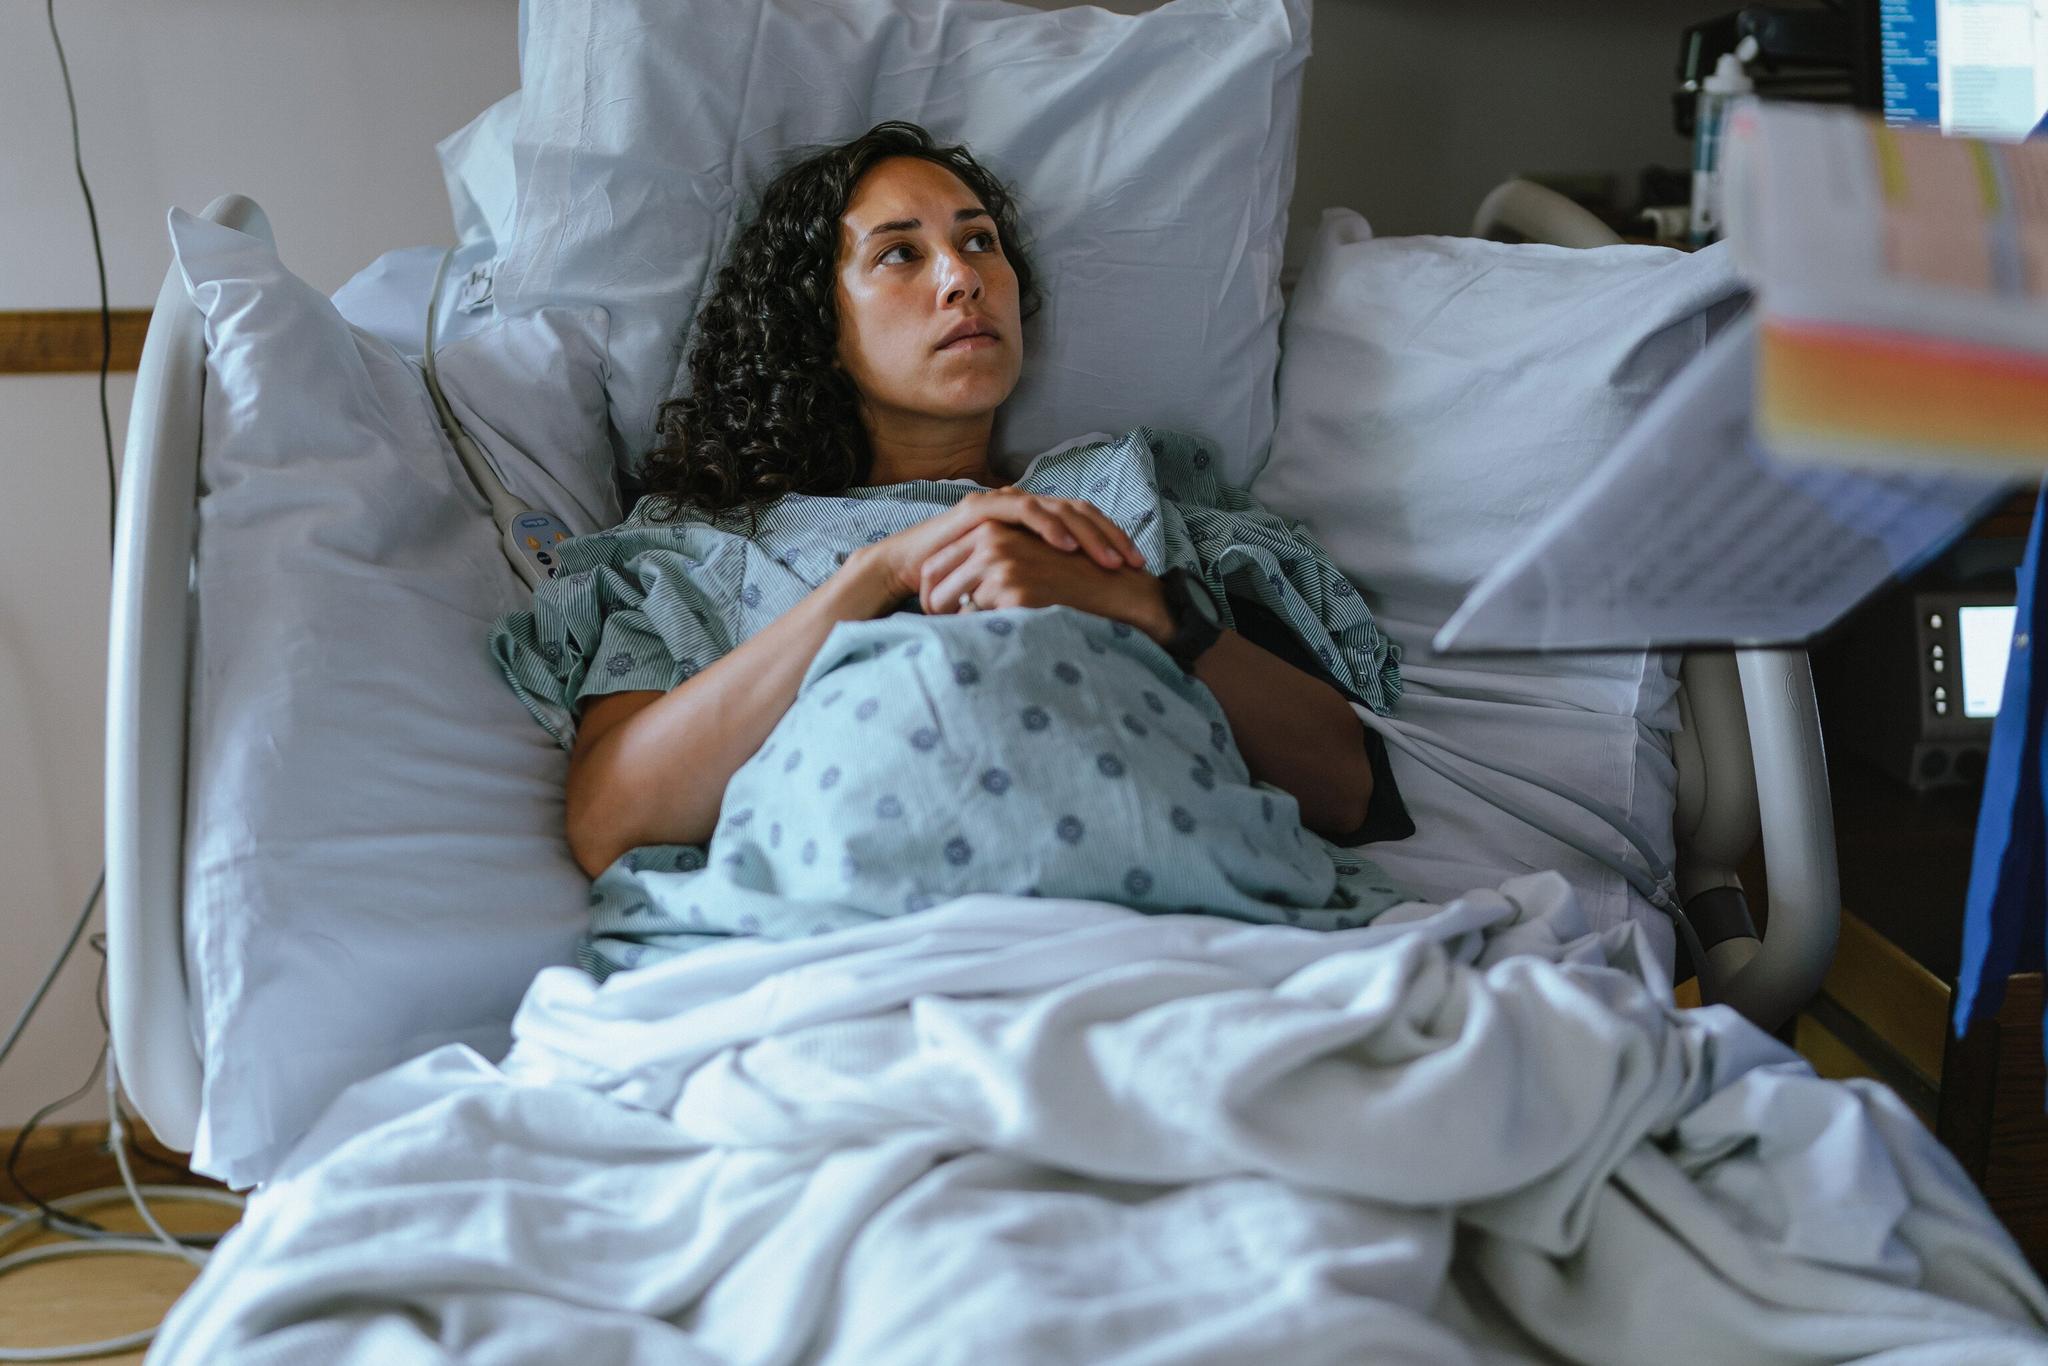 A pregnant woman in a hospital bed speaking with a doctor.